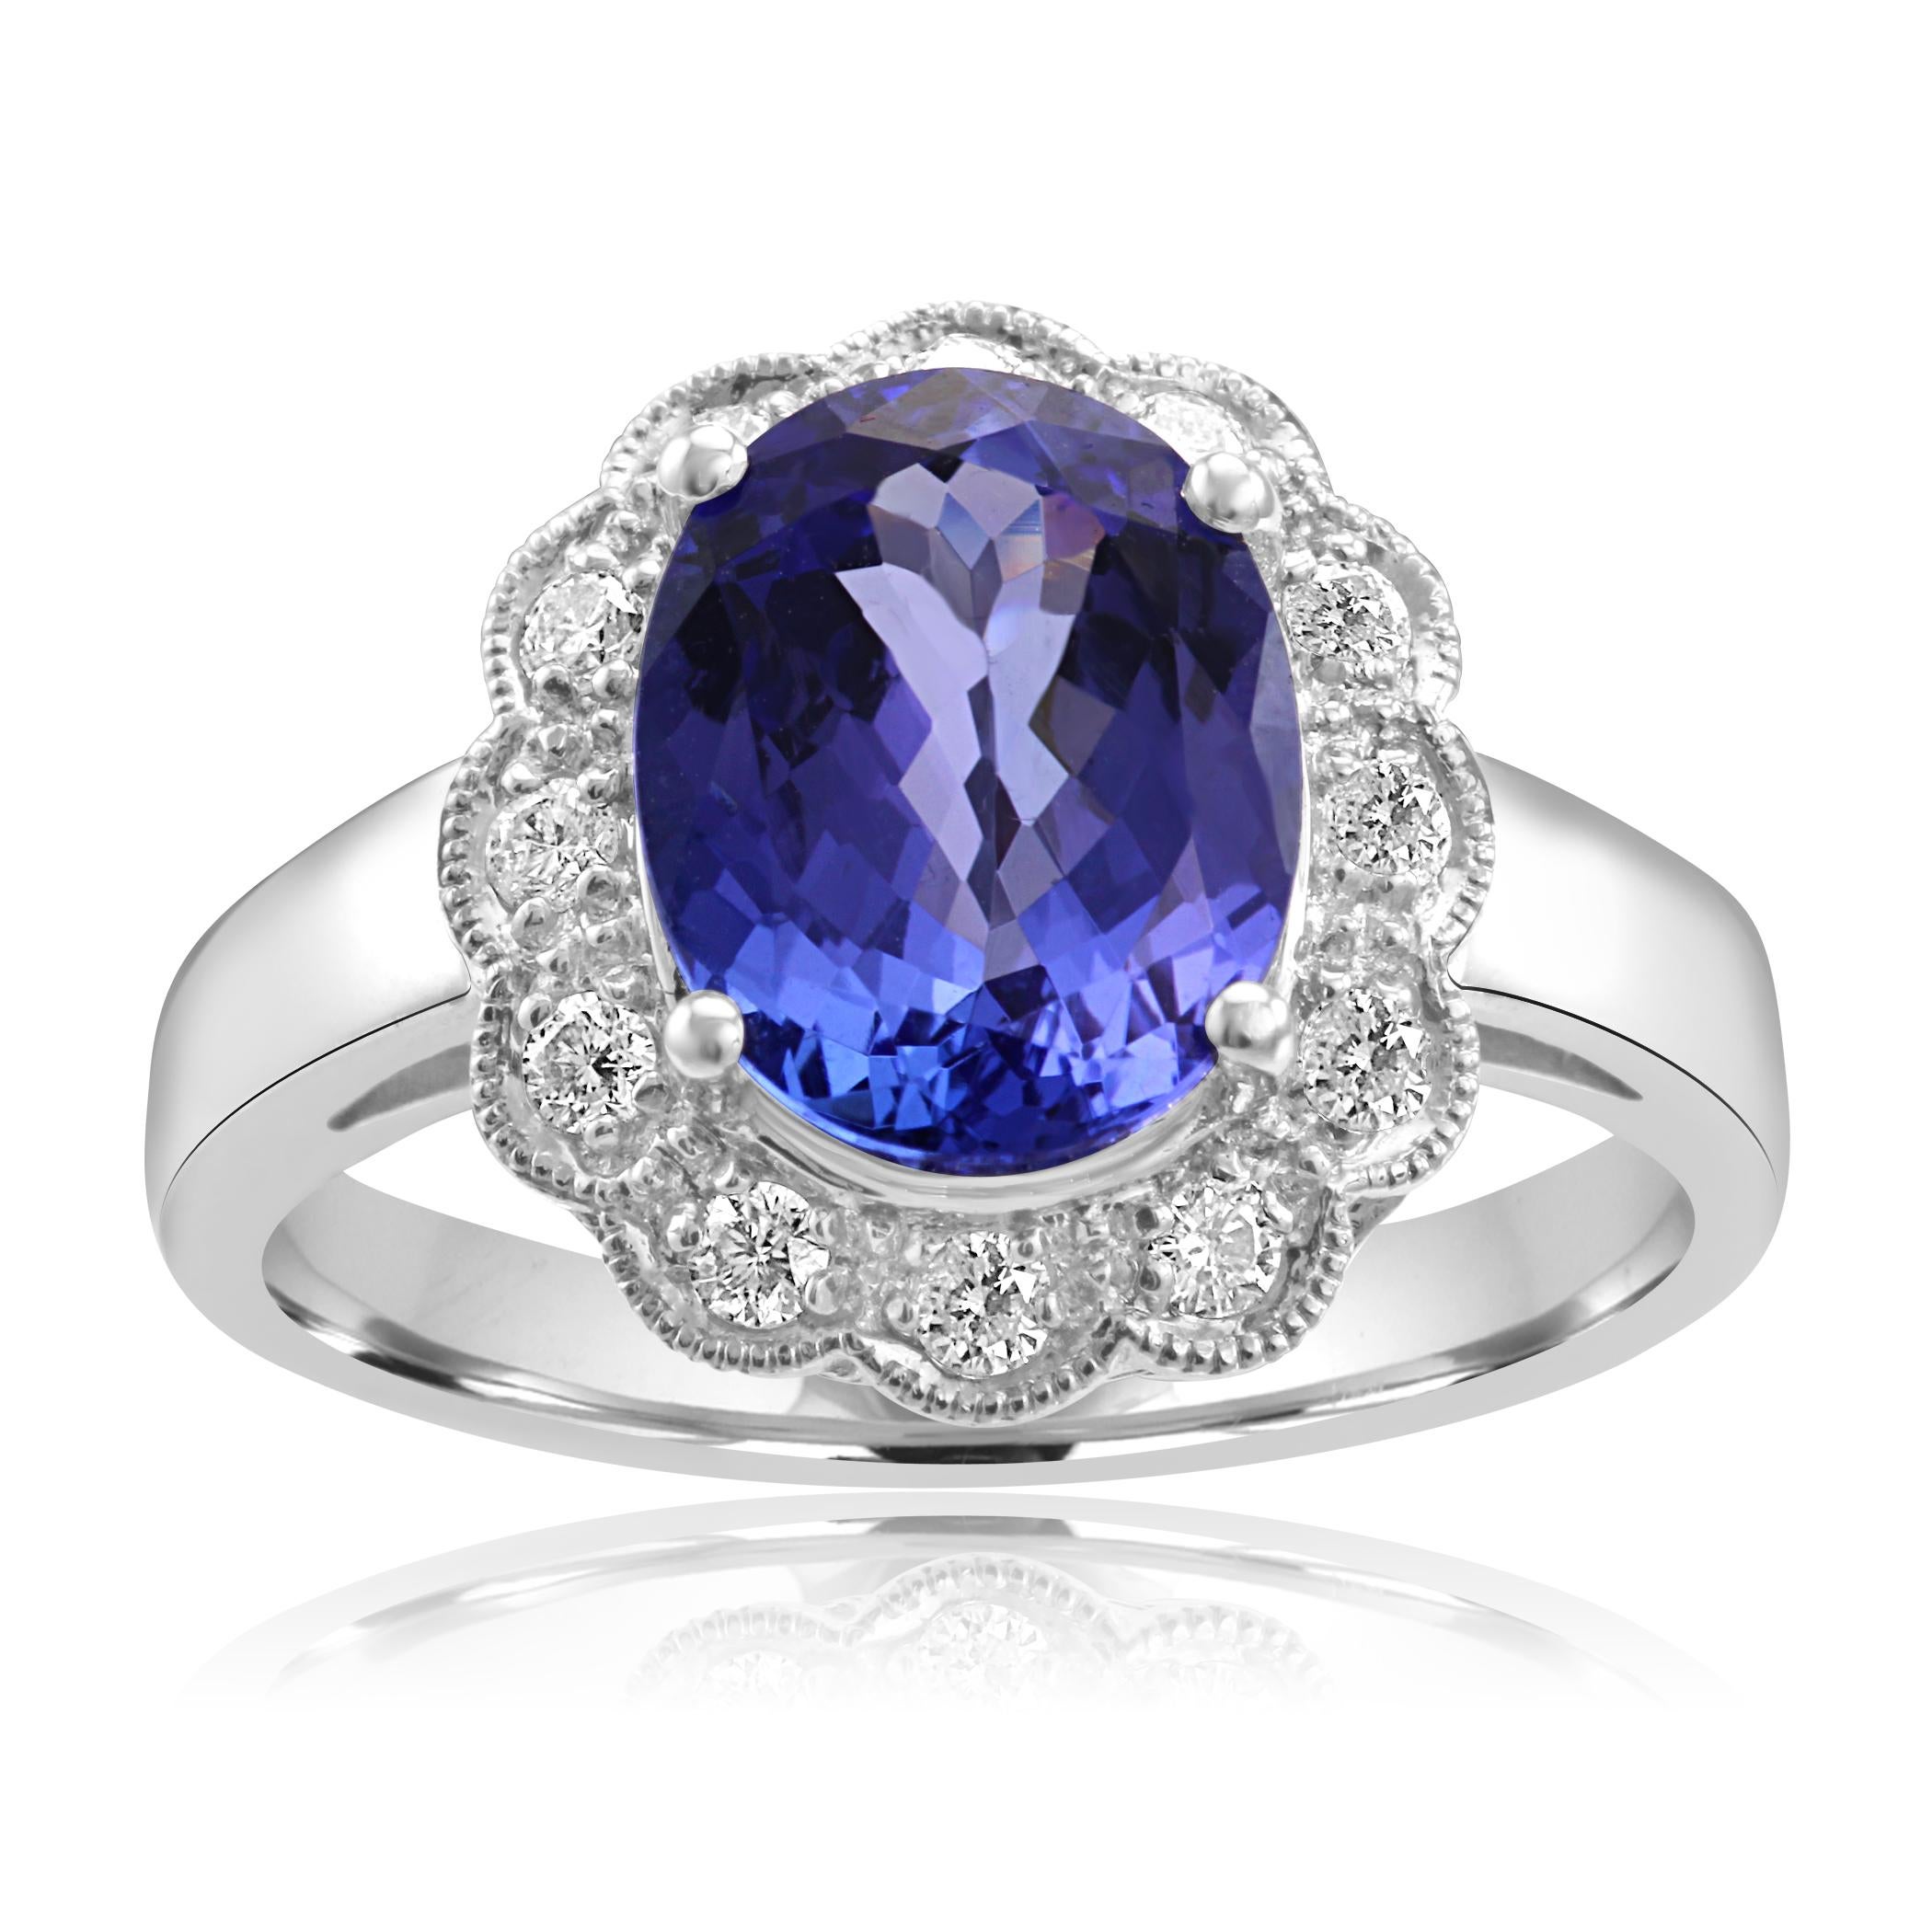 Desirable Tanzanite Oval 2.79 Carat encircled in a single Halo of White G-H Color SI Diamond Rounds 0.25 Carat in 14K White Gold Bridal Cocktail Ring with filigree work.

Total Stone Weight 3.04

Style available in different price ranges, can be